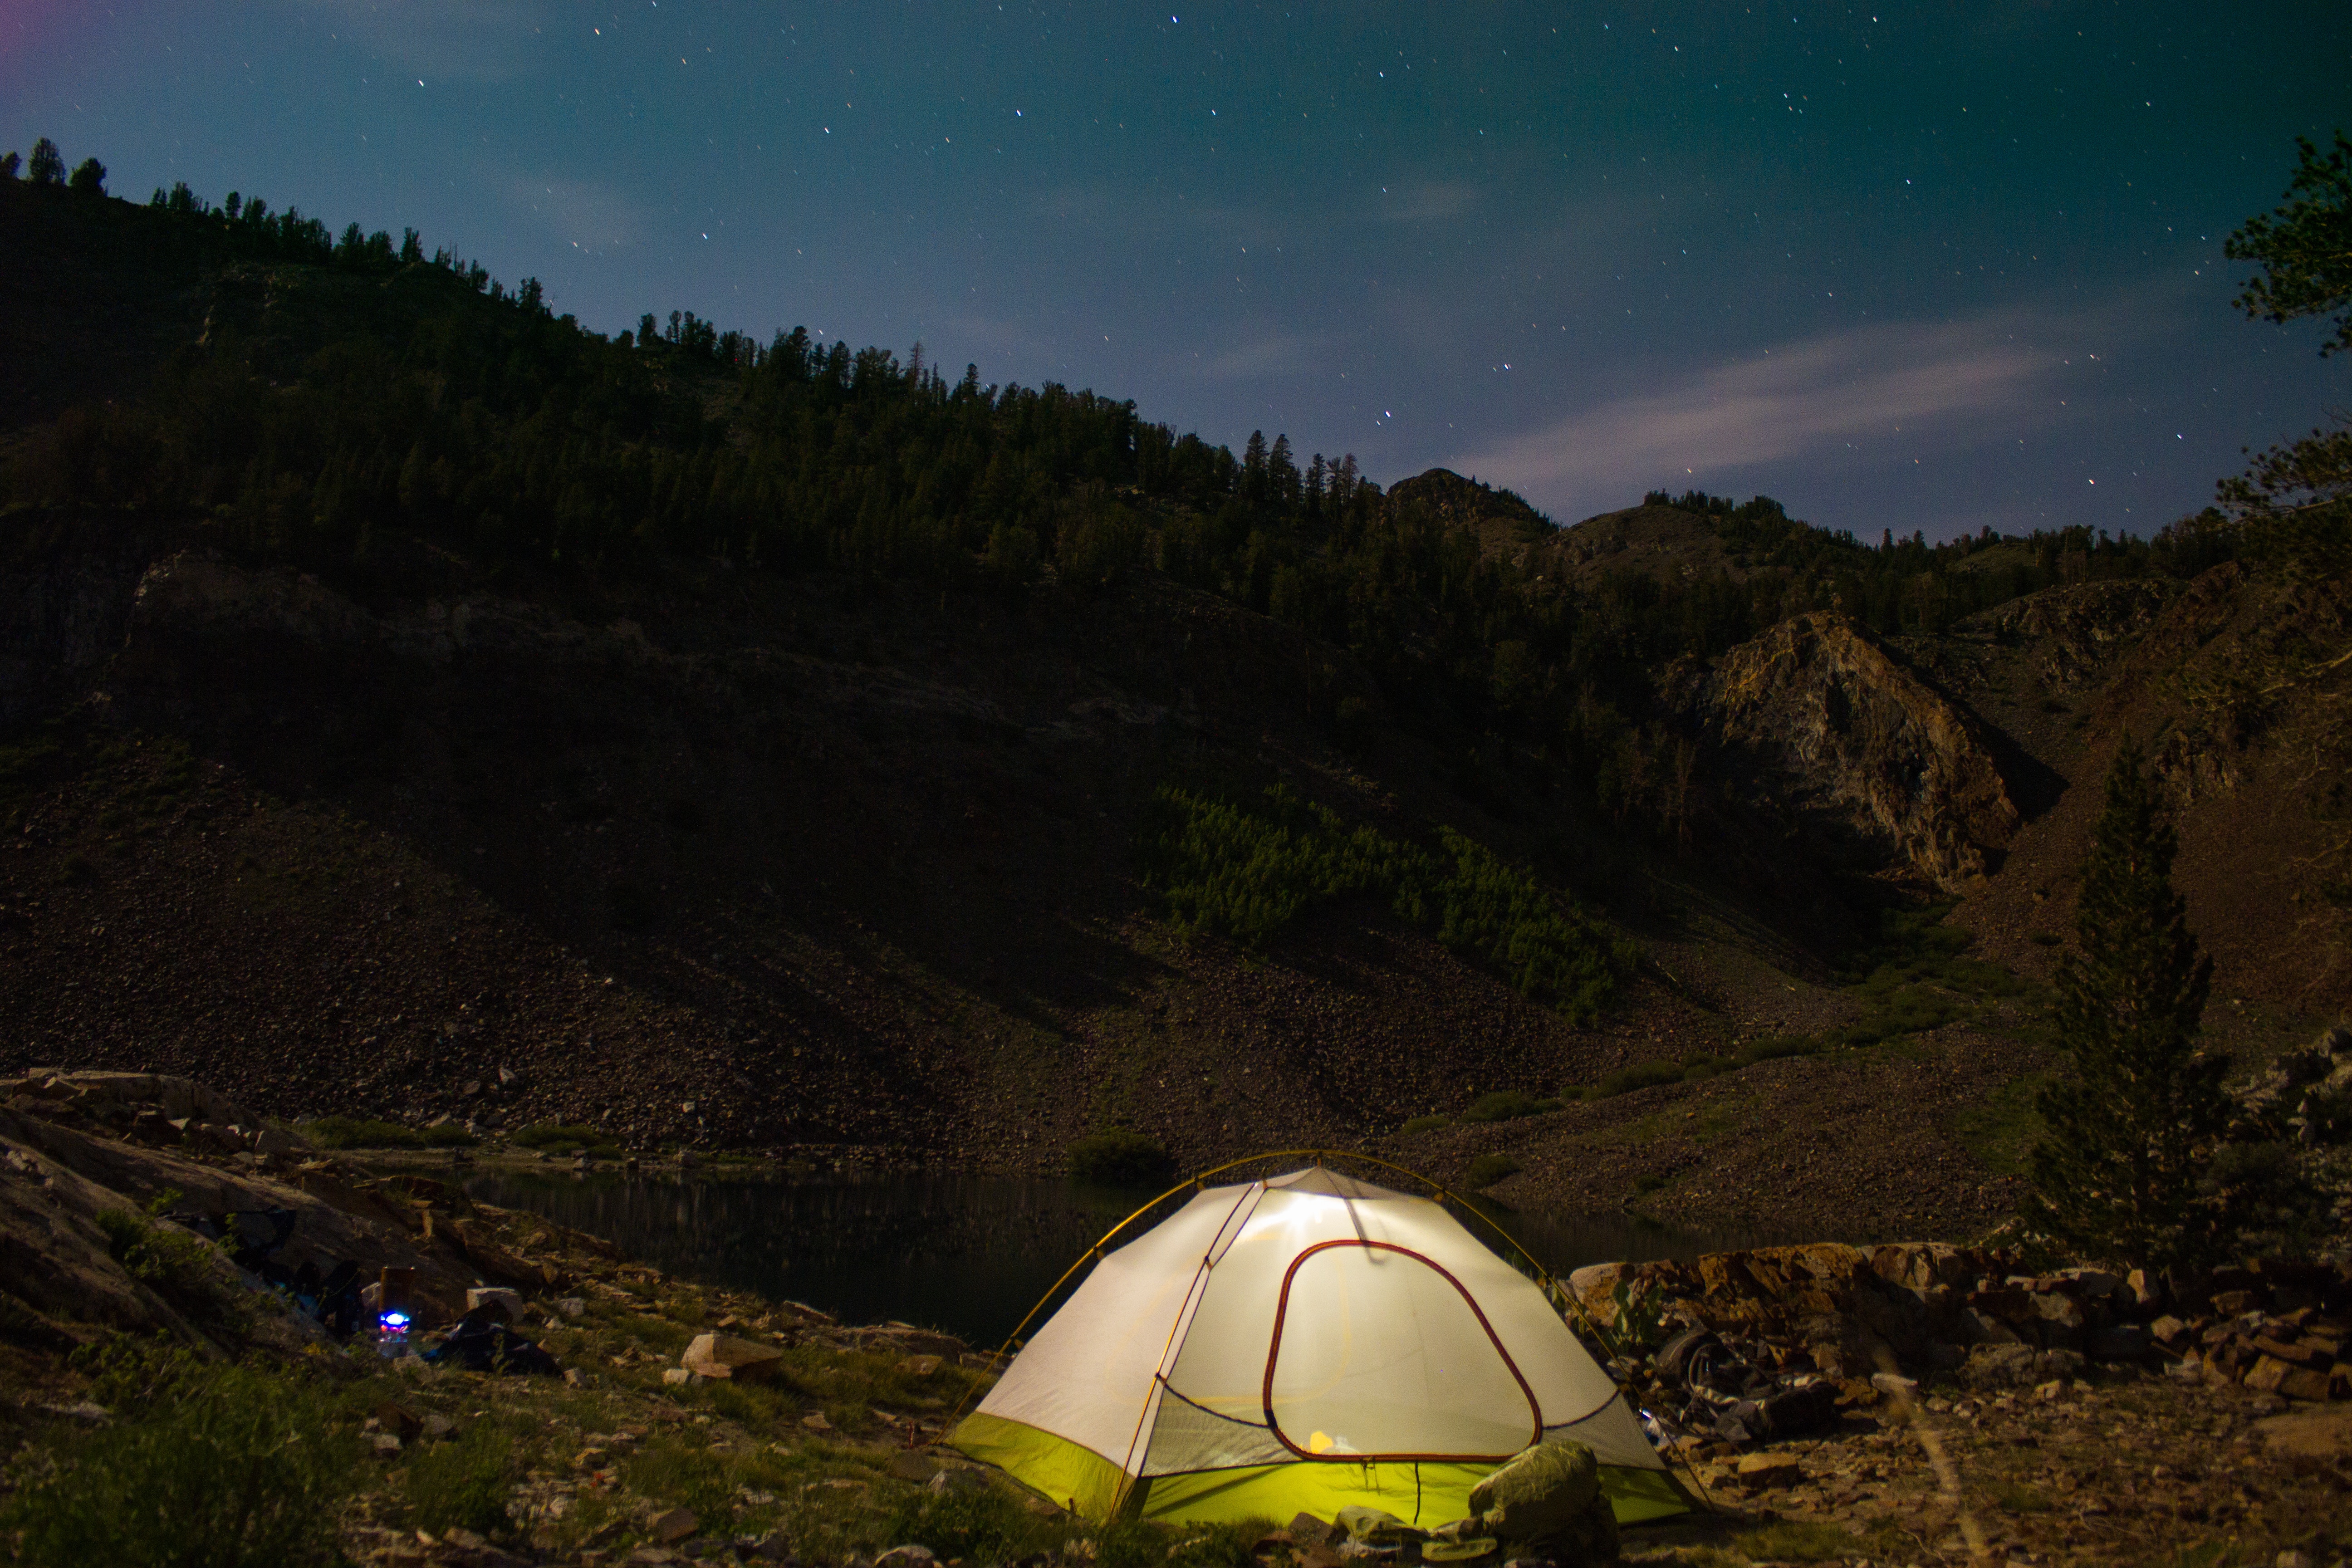 camping, tent, nature, mountains, lake, evening, campsite